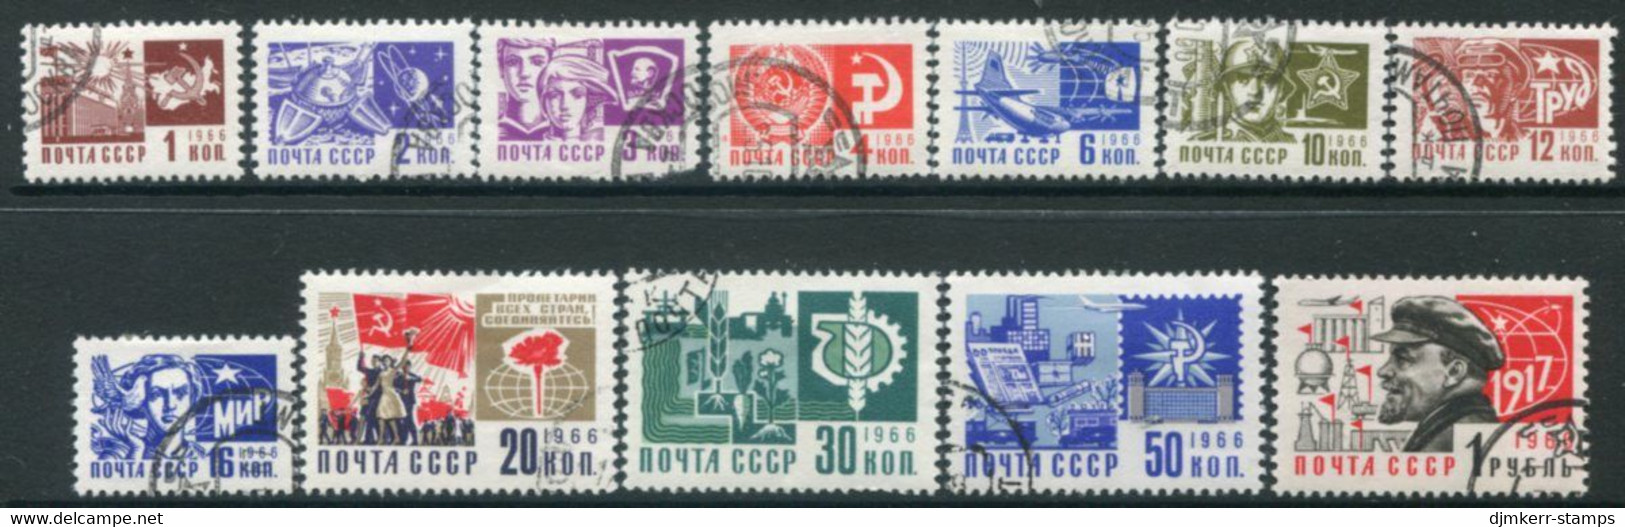 SOVIET UNION 1966 Definitive: Society And Technology Used.  Michel 3279-90 - Used Stamps